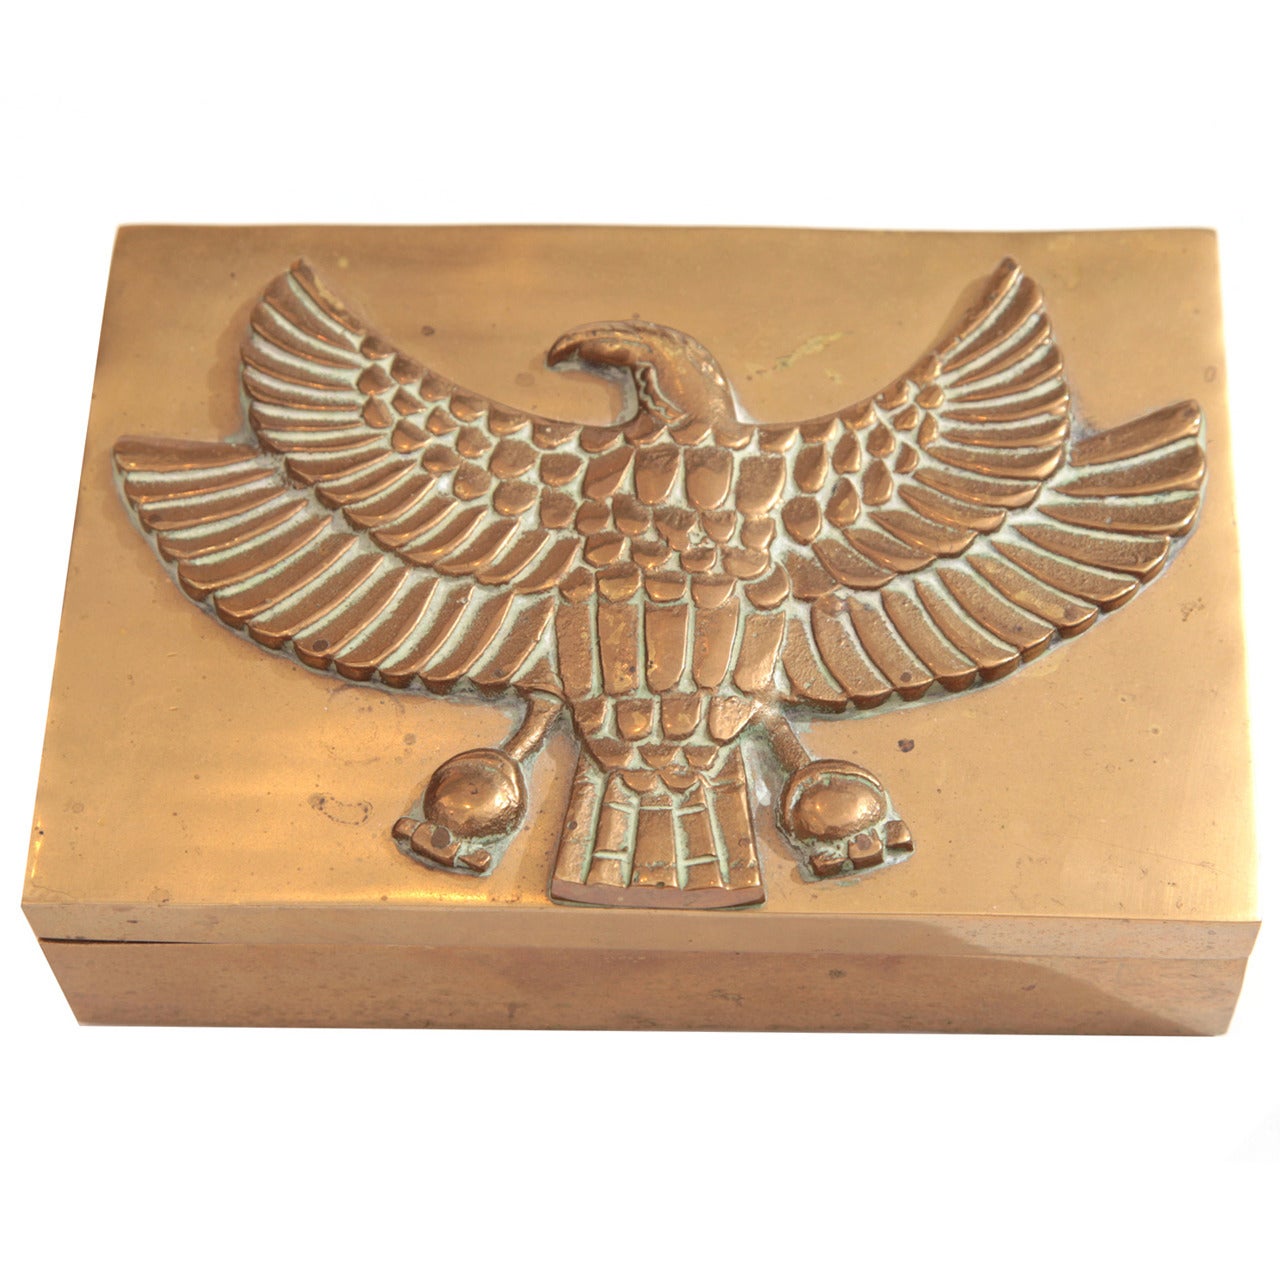 Solid Brass Jewelry Box with Eagle Motif